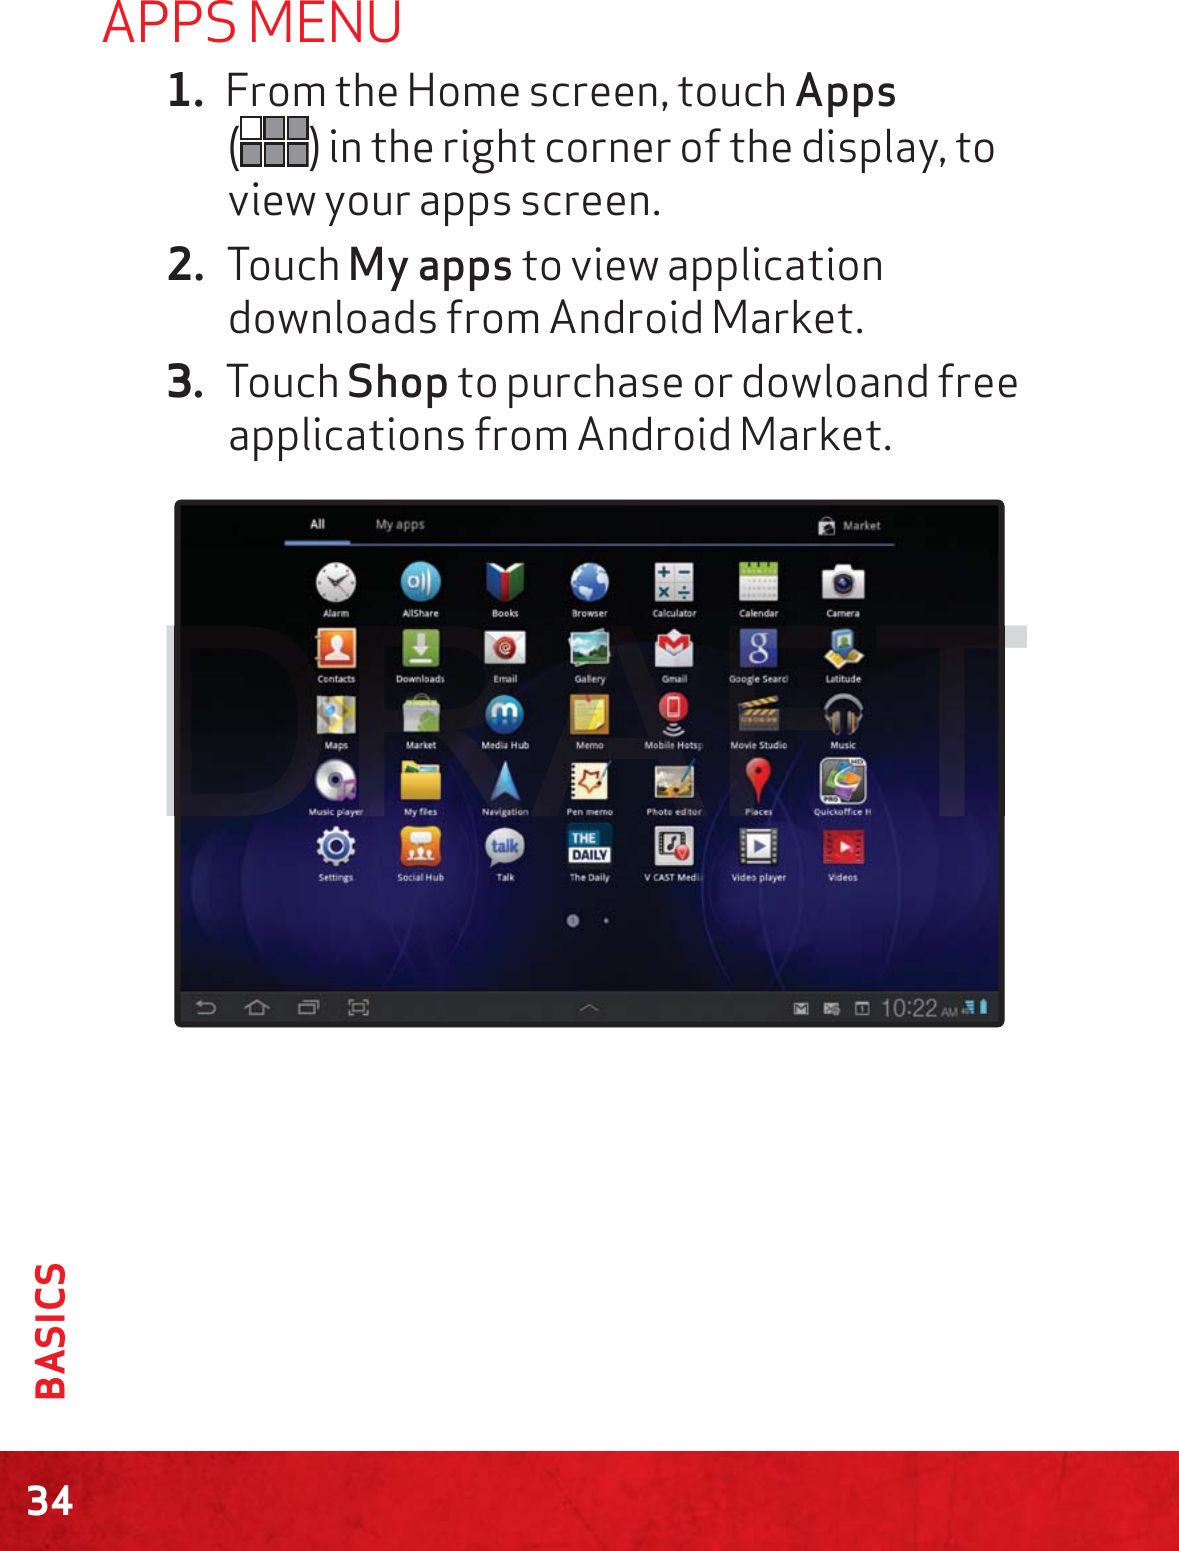 34BASICSAPPS MENU1. From the Home screen, touch Apps  () in the right corner of the display, to view your apps screen. 2. Touch My apps to view application downloads from Android Market.3. Touch Shop to purchase or dowloand free applications from Android Market.TTTDDD